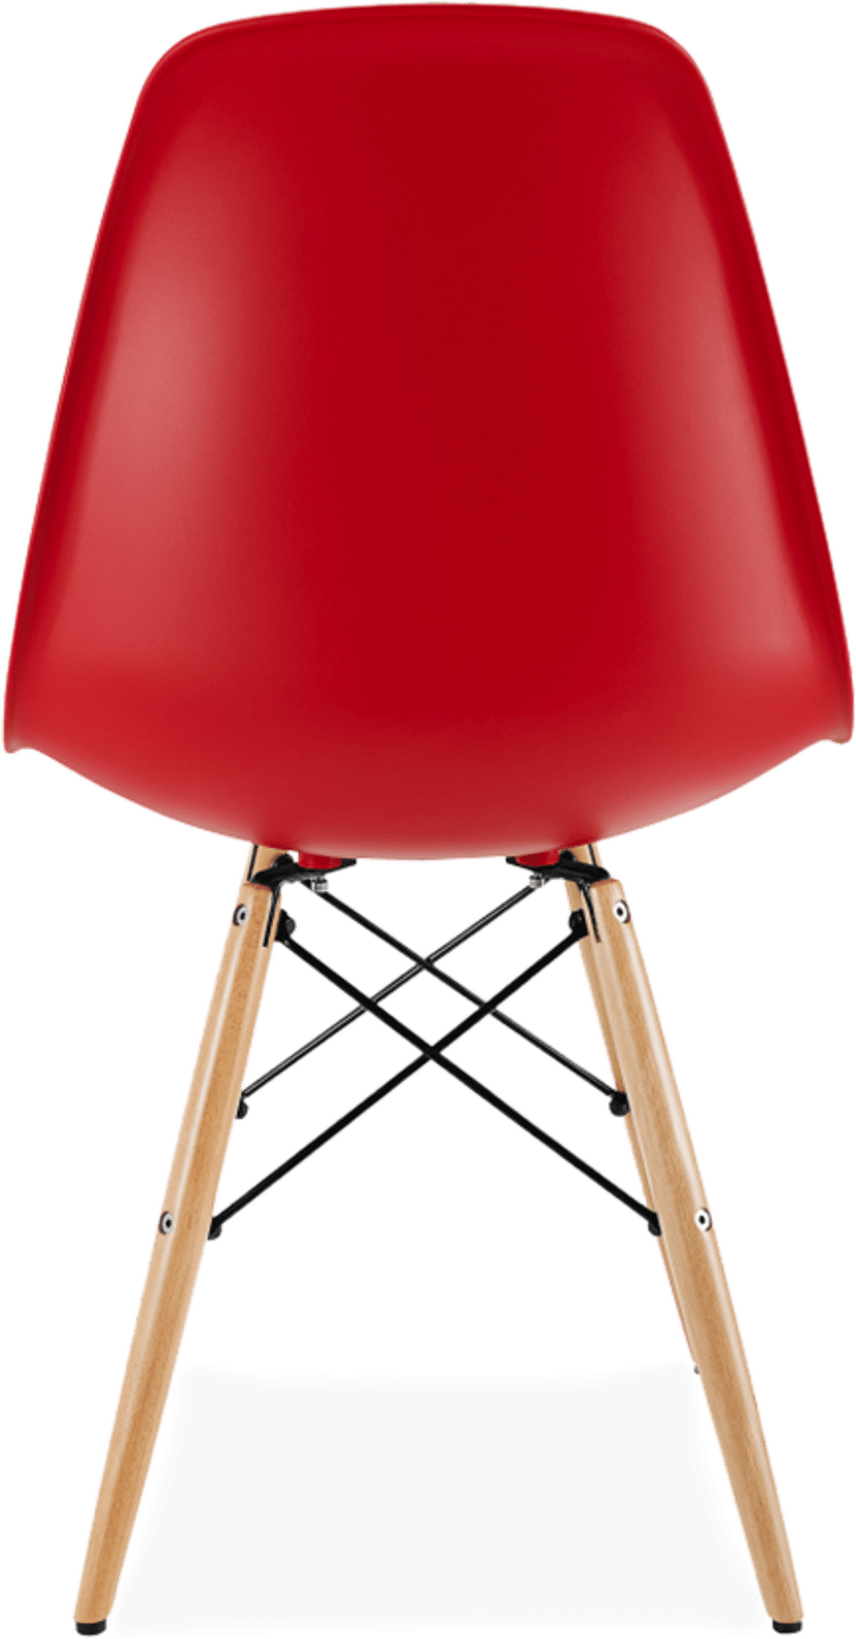 Silla DSW Style Red/Light Wood image.